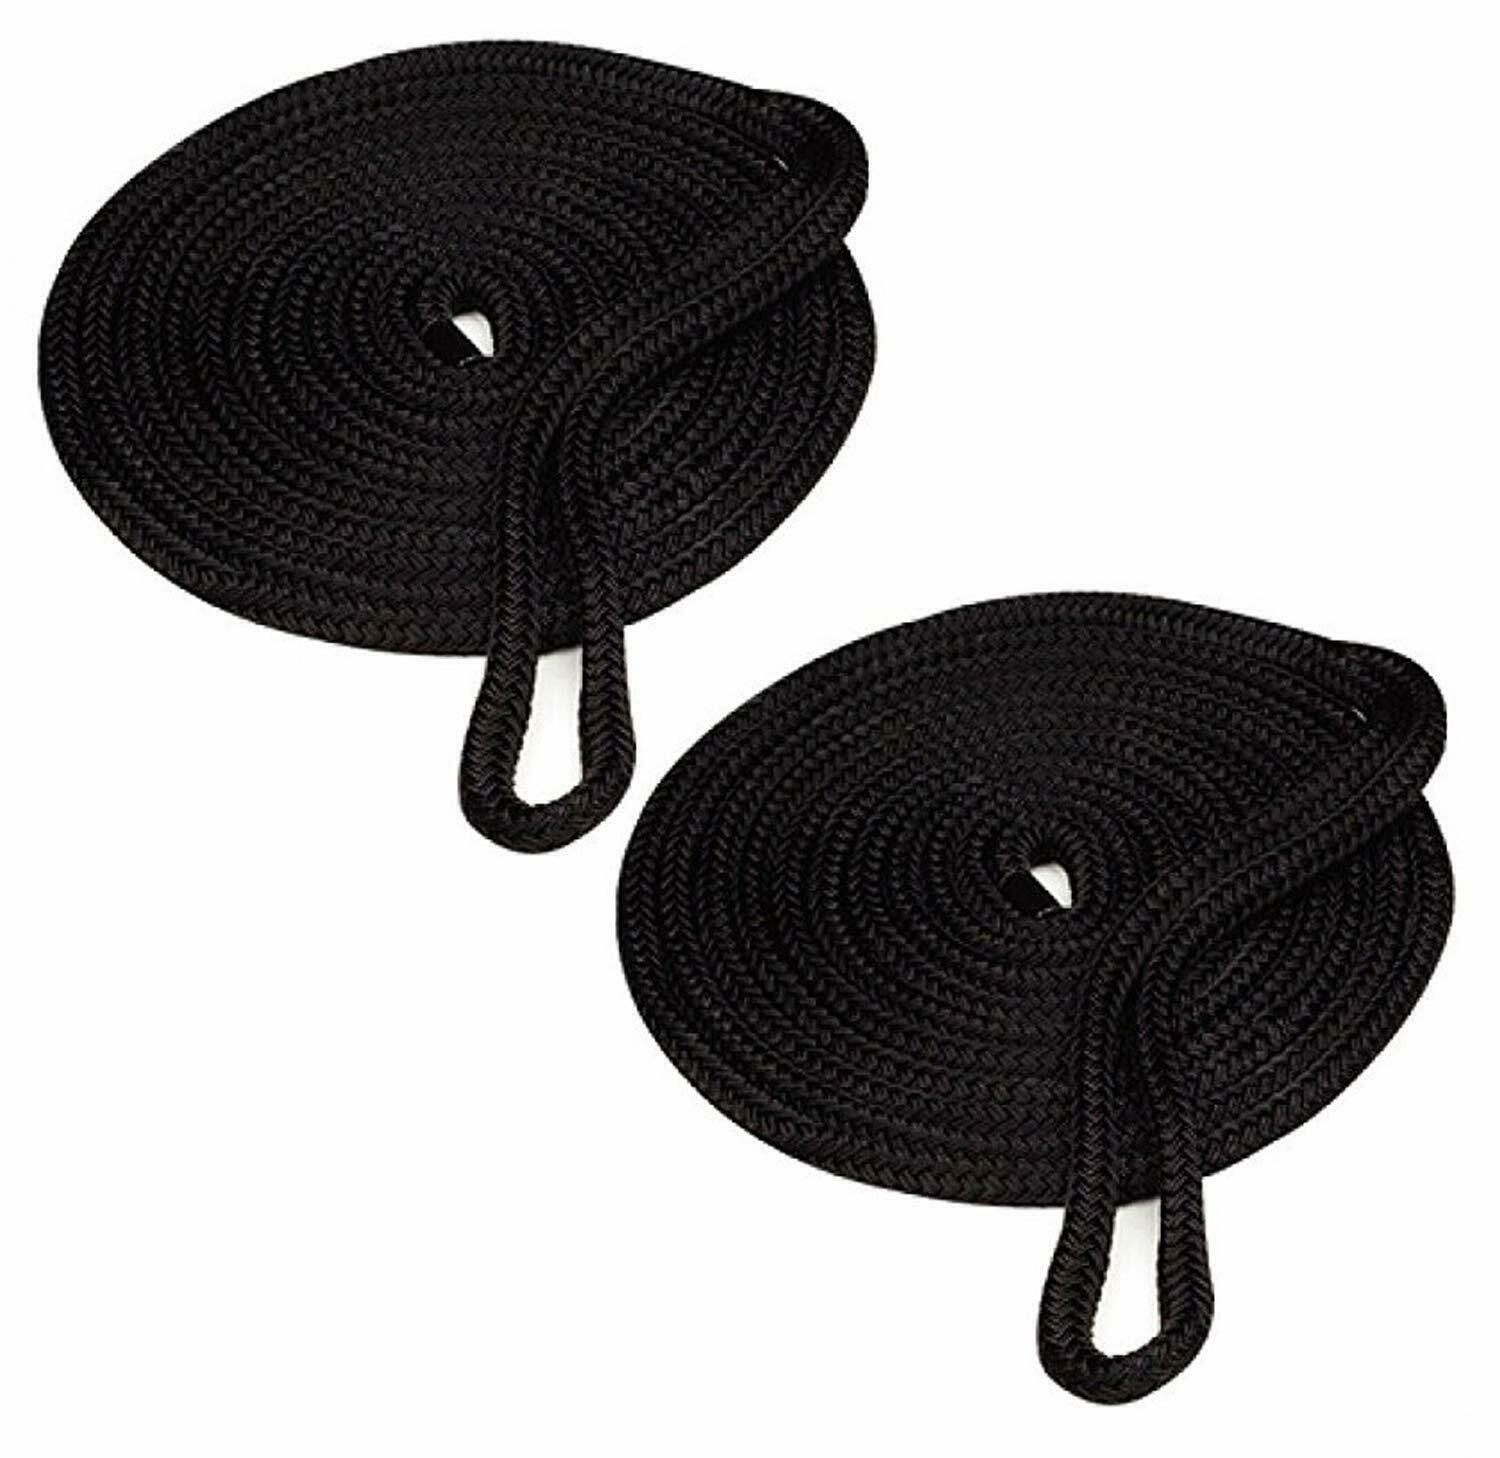 2 Pack of 3/8 Inch x 25 Ft Premium Twisted Nylon Mooring and Docking Lines